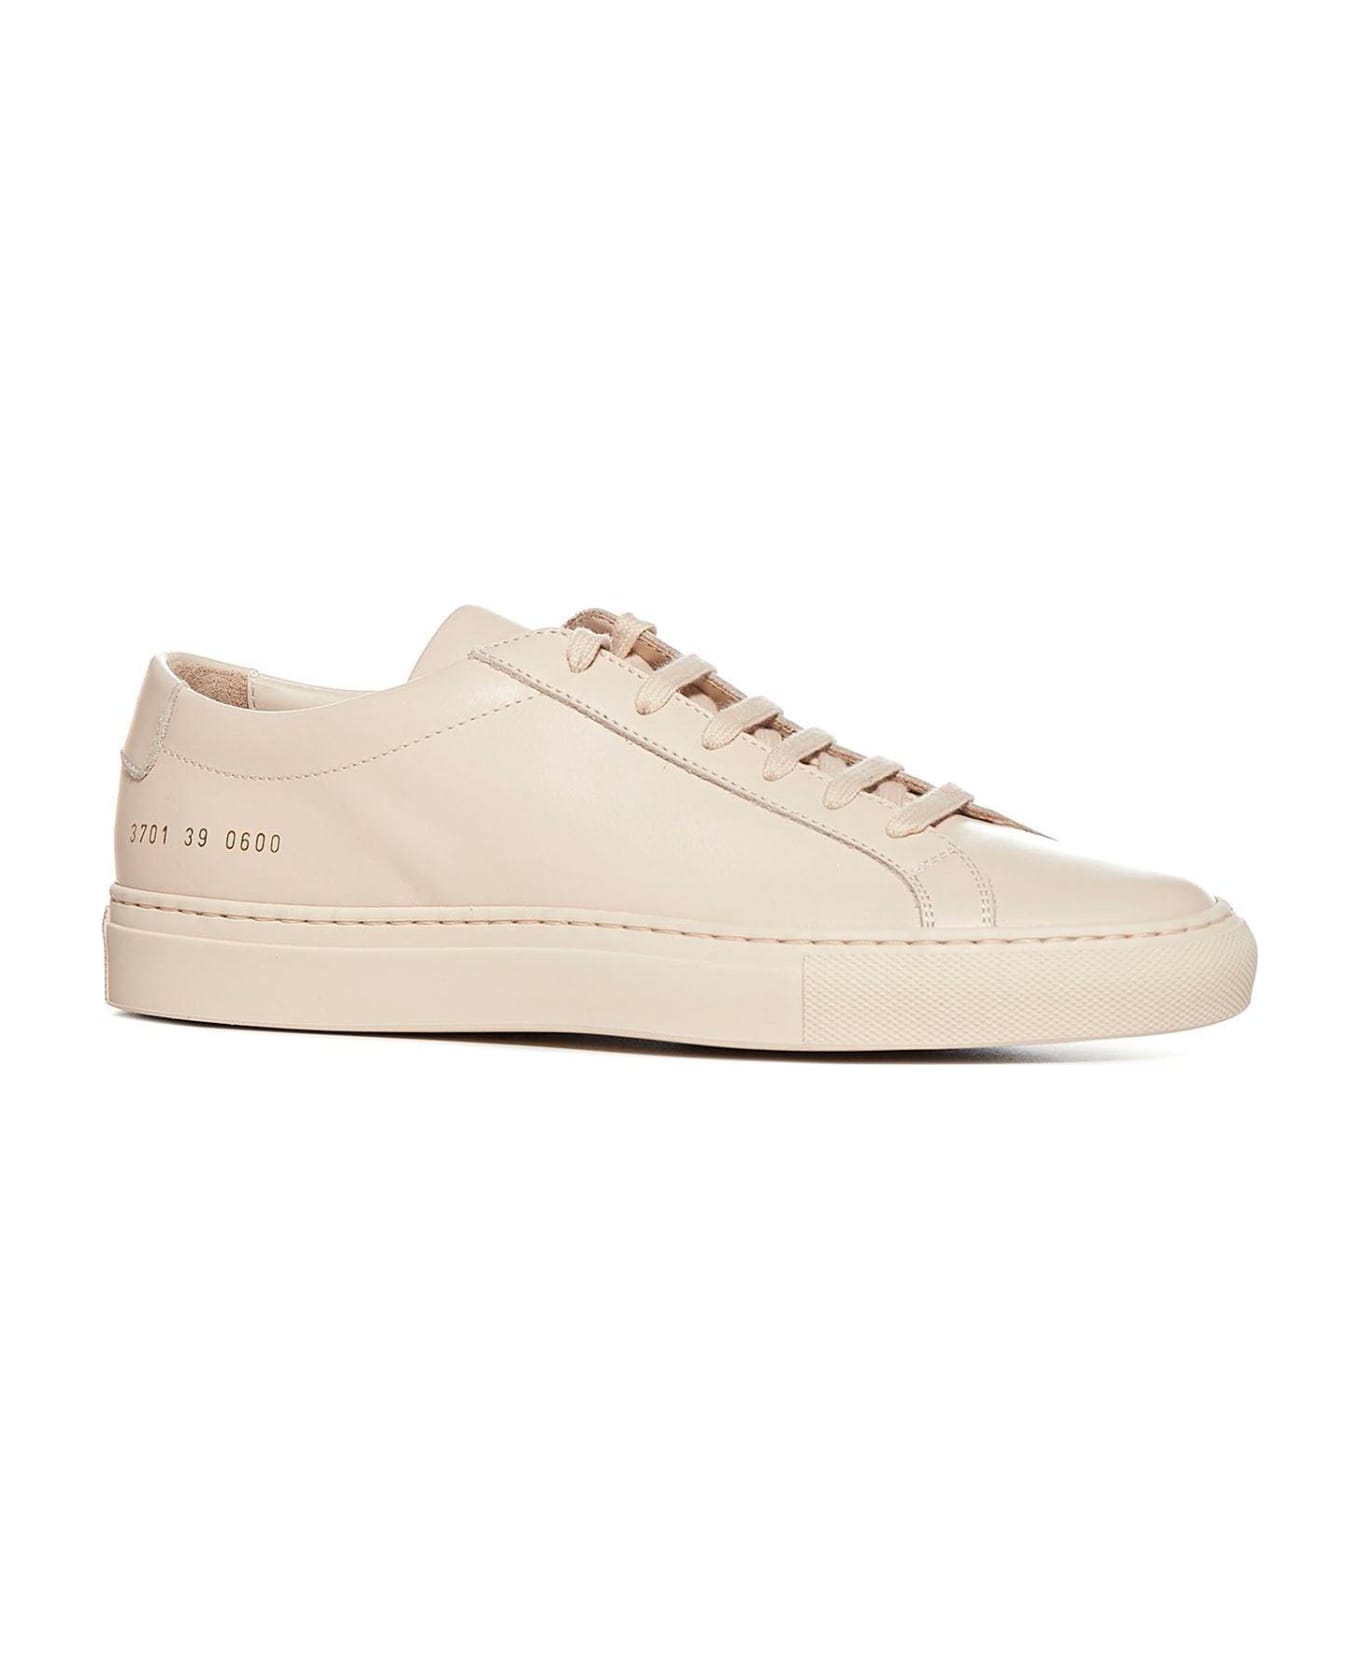 Common Projects Original Achilles Lace-up Sneakers - Cipria